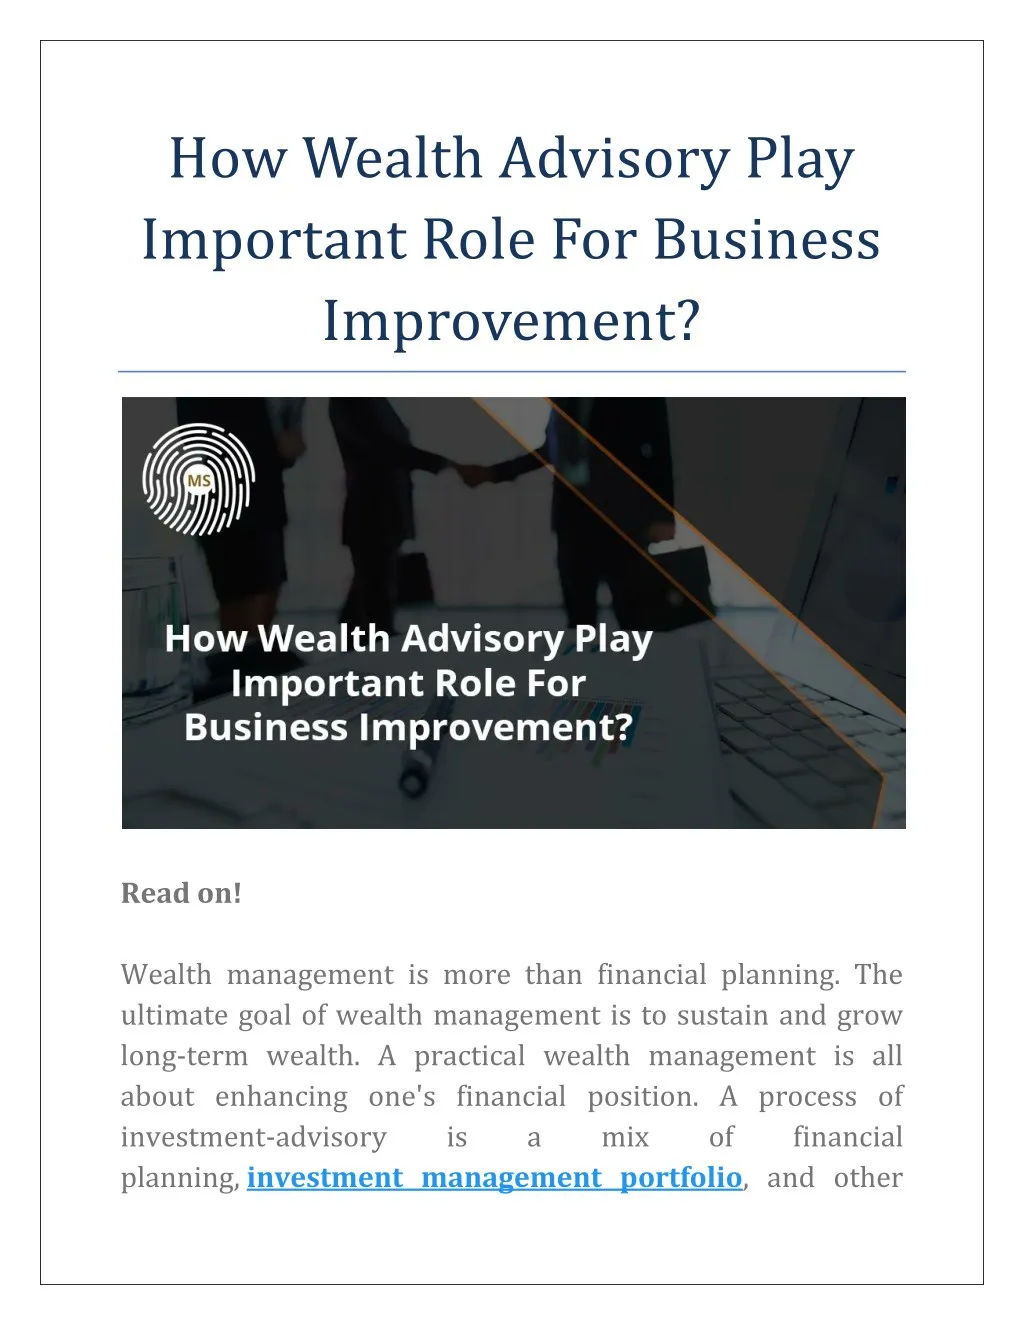 how wealth advisory play important role